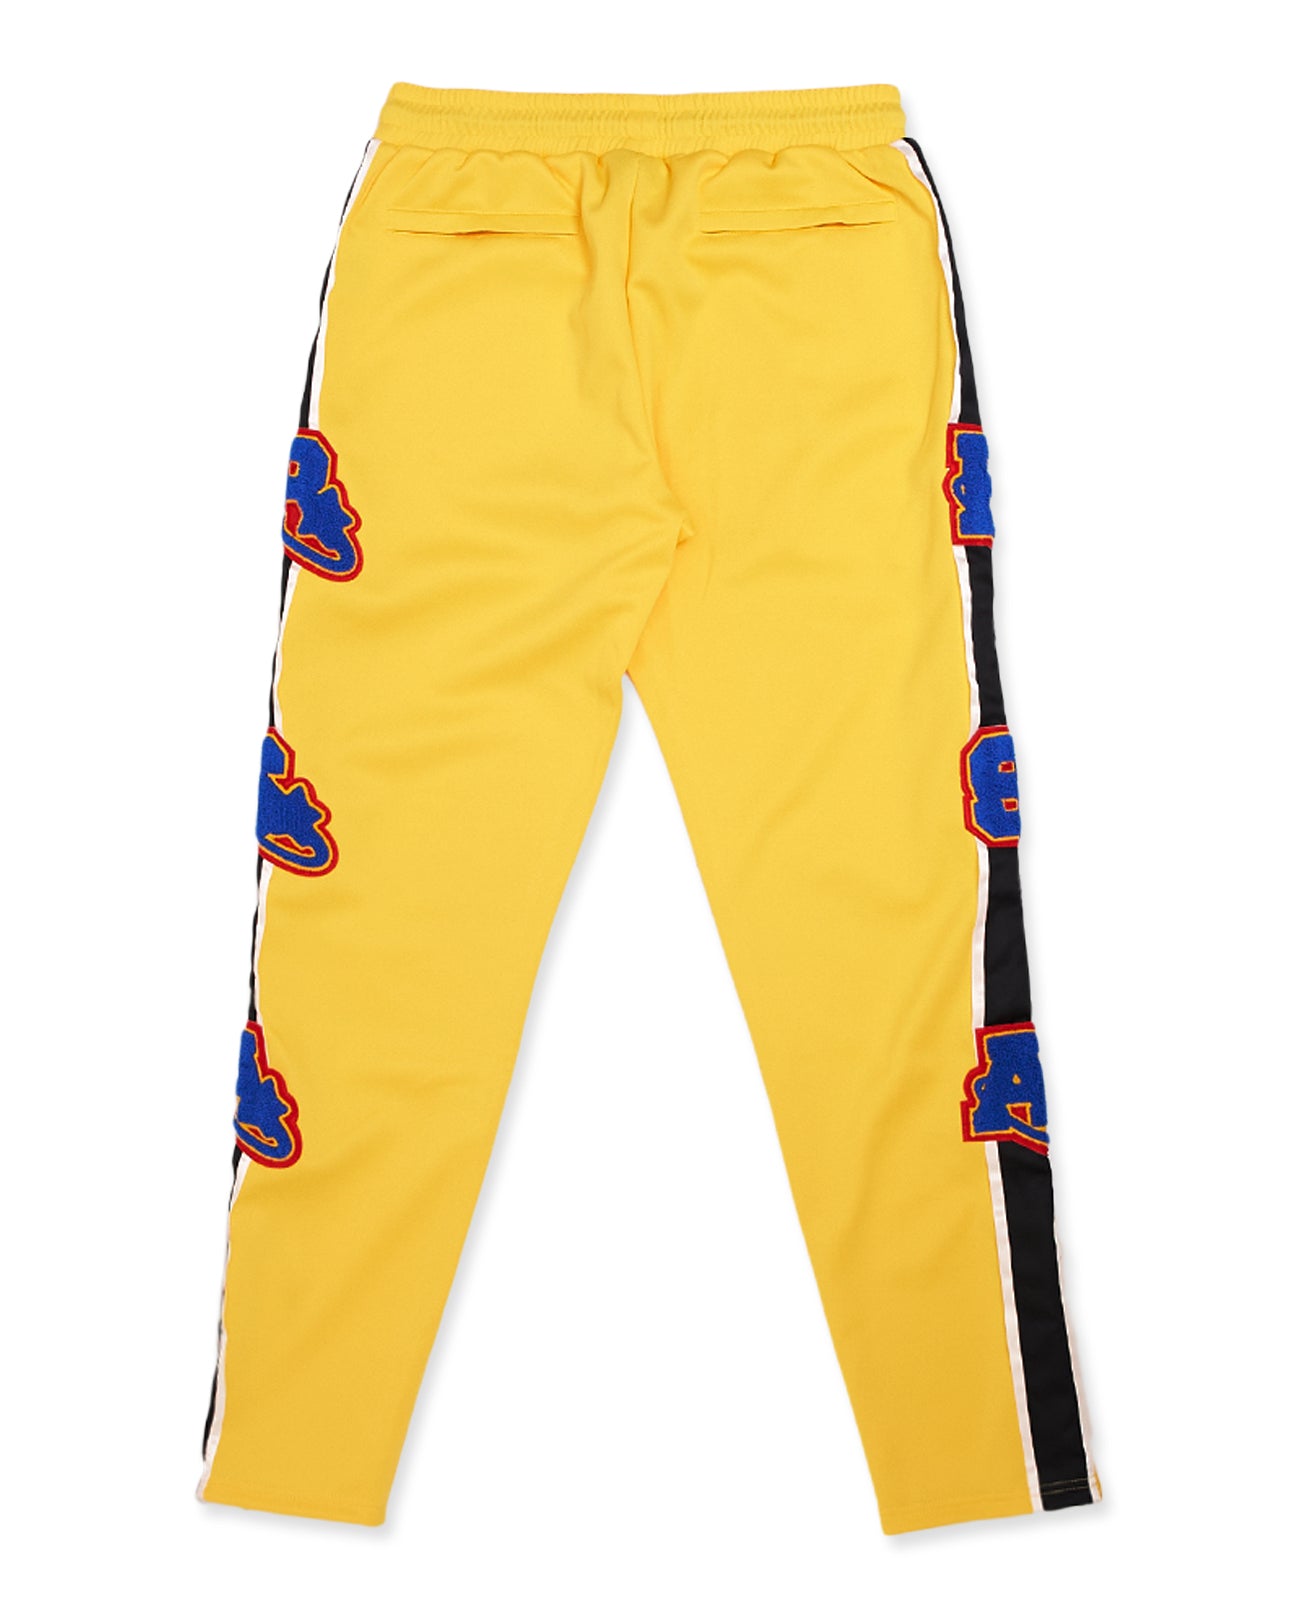 All-Star TrackPant